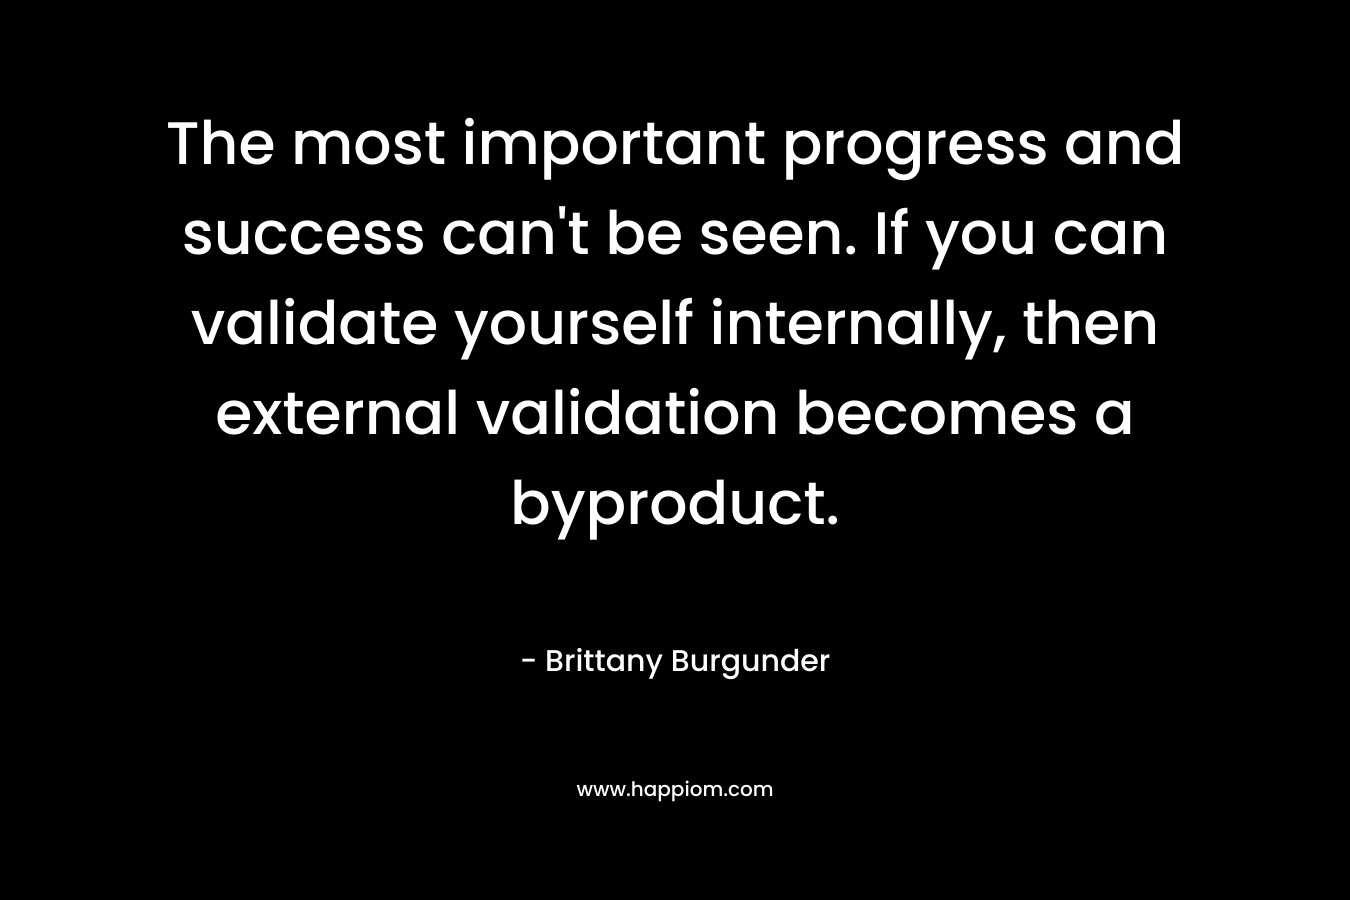 The most important progress and success can't be seen. If you can validate yourself internally, then external validation becomes a byproduct.